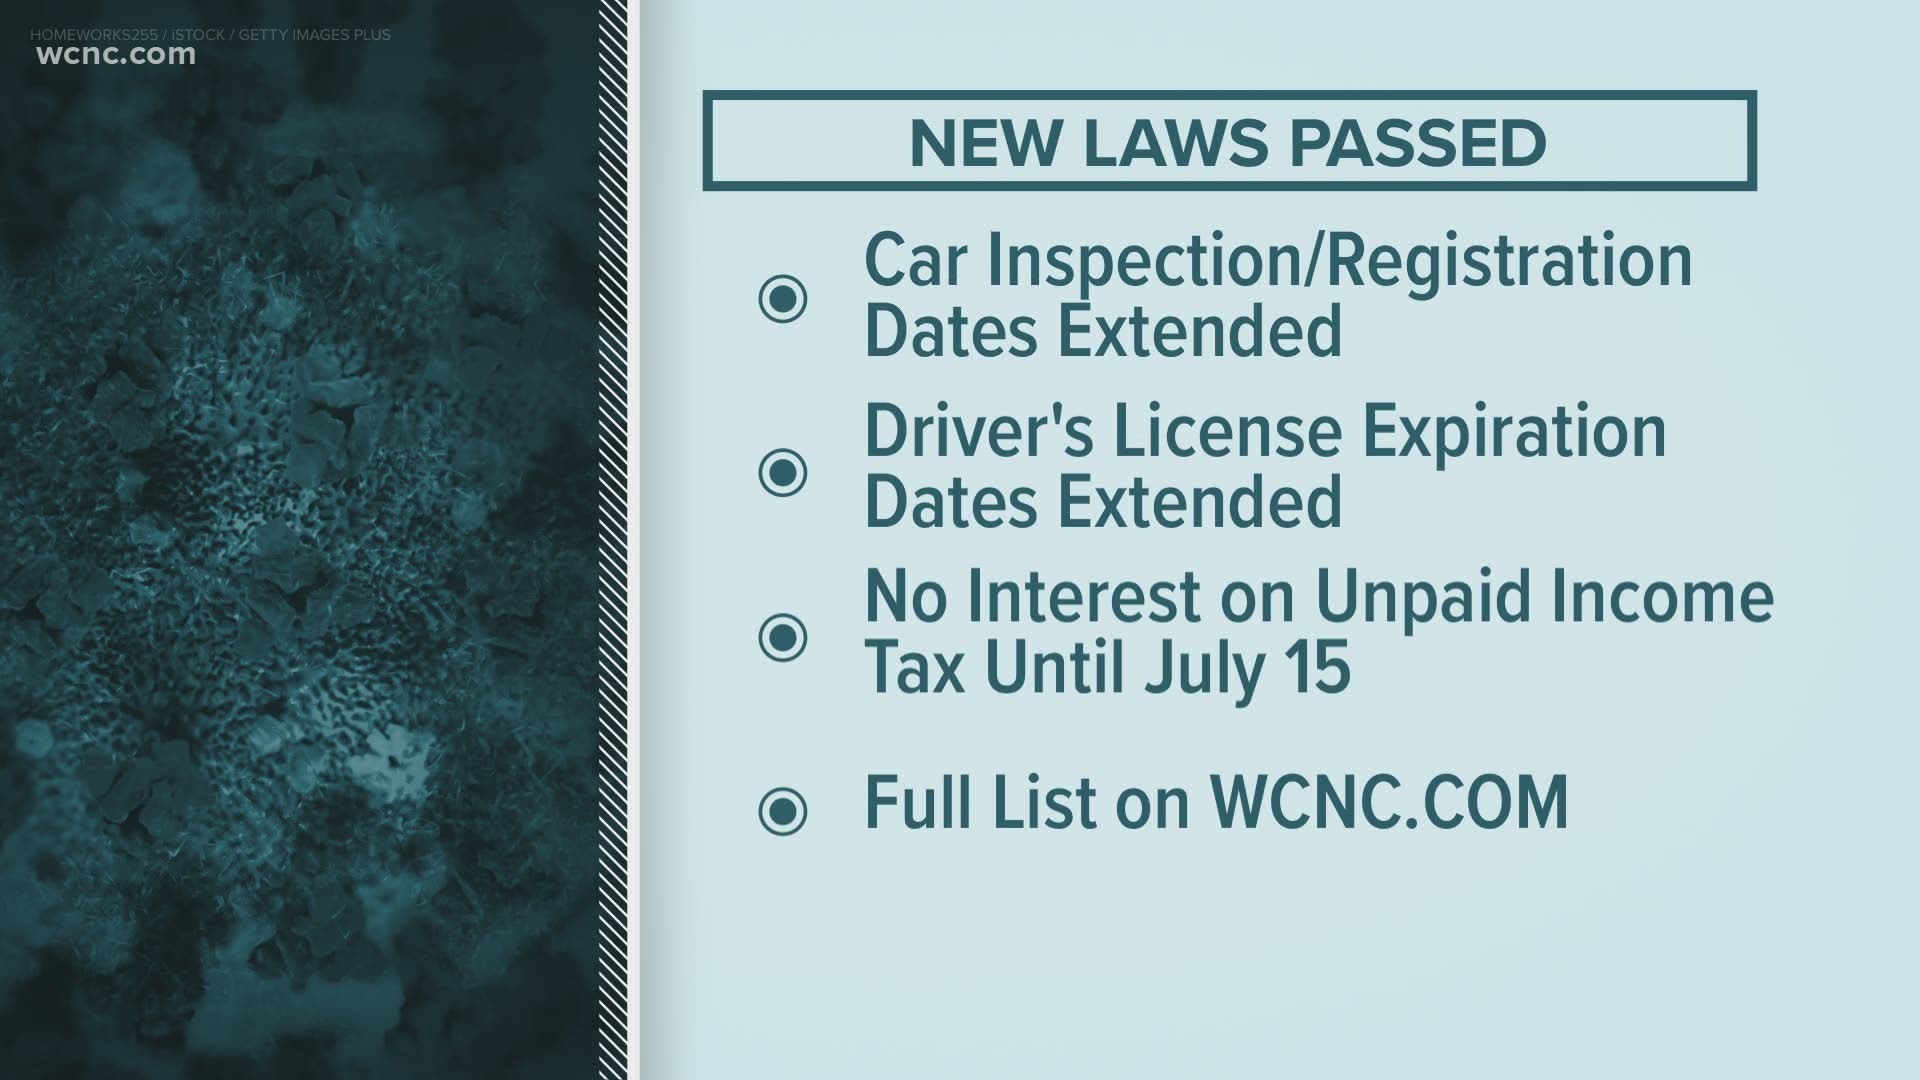 19 new laws have now passed in North Carolina including driver's license expiration date extended, no interest on unpaid income taxes until July 15th, and many more.